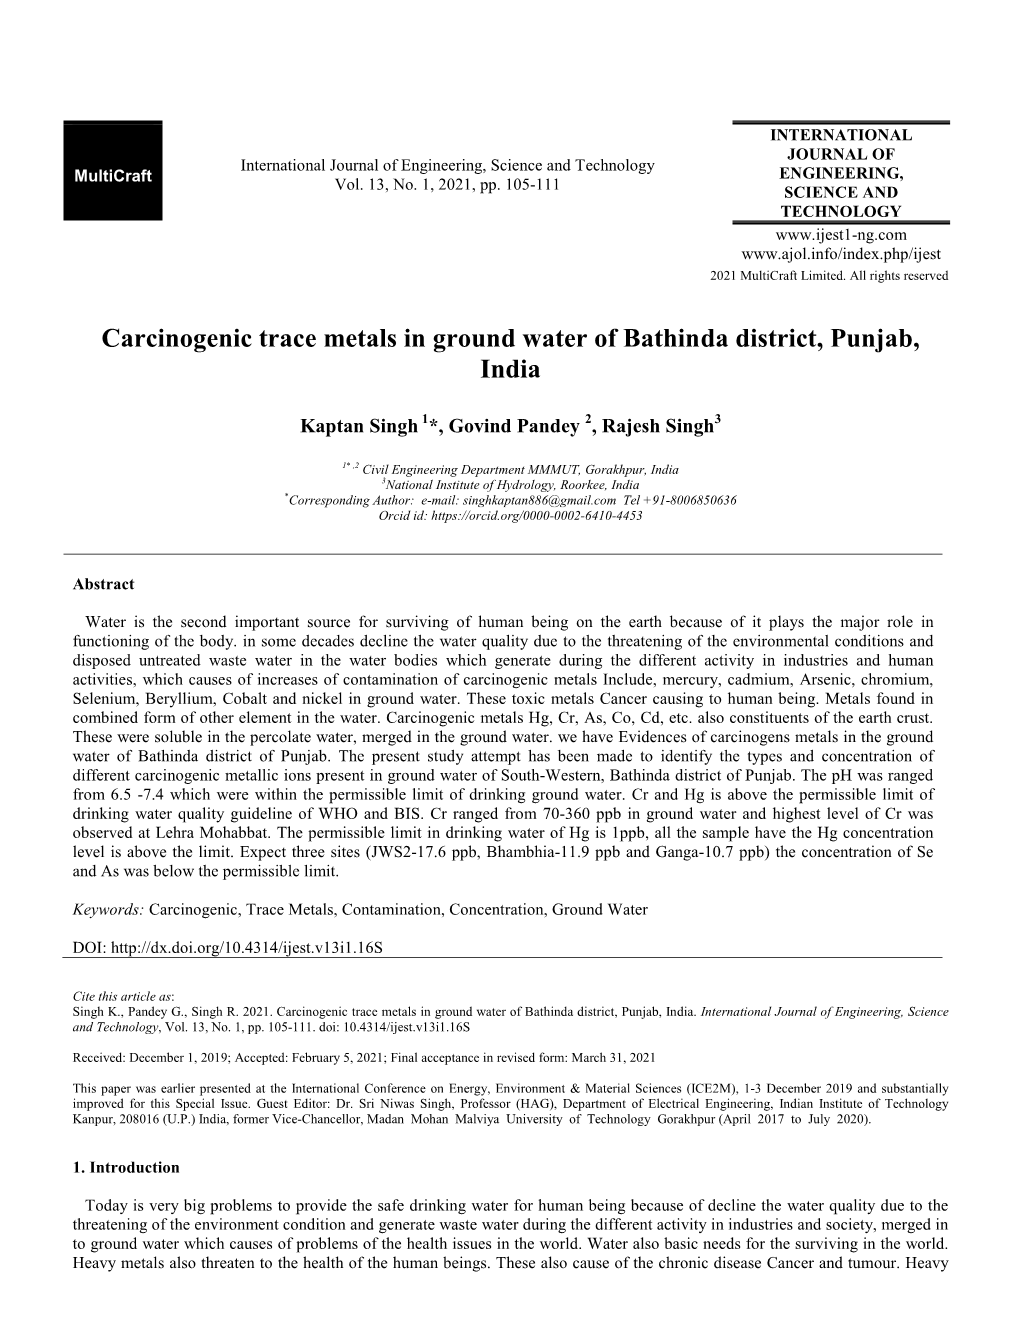 Carcinogenic Trace Metals in Ground Water of Bathinda District, Punjab, India